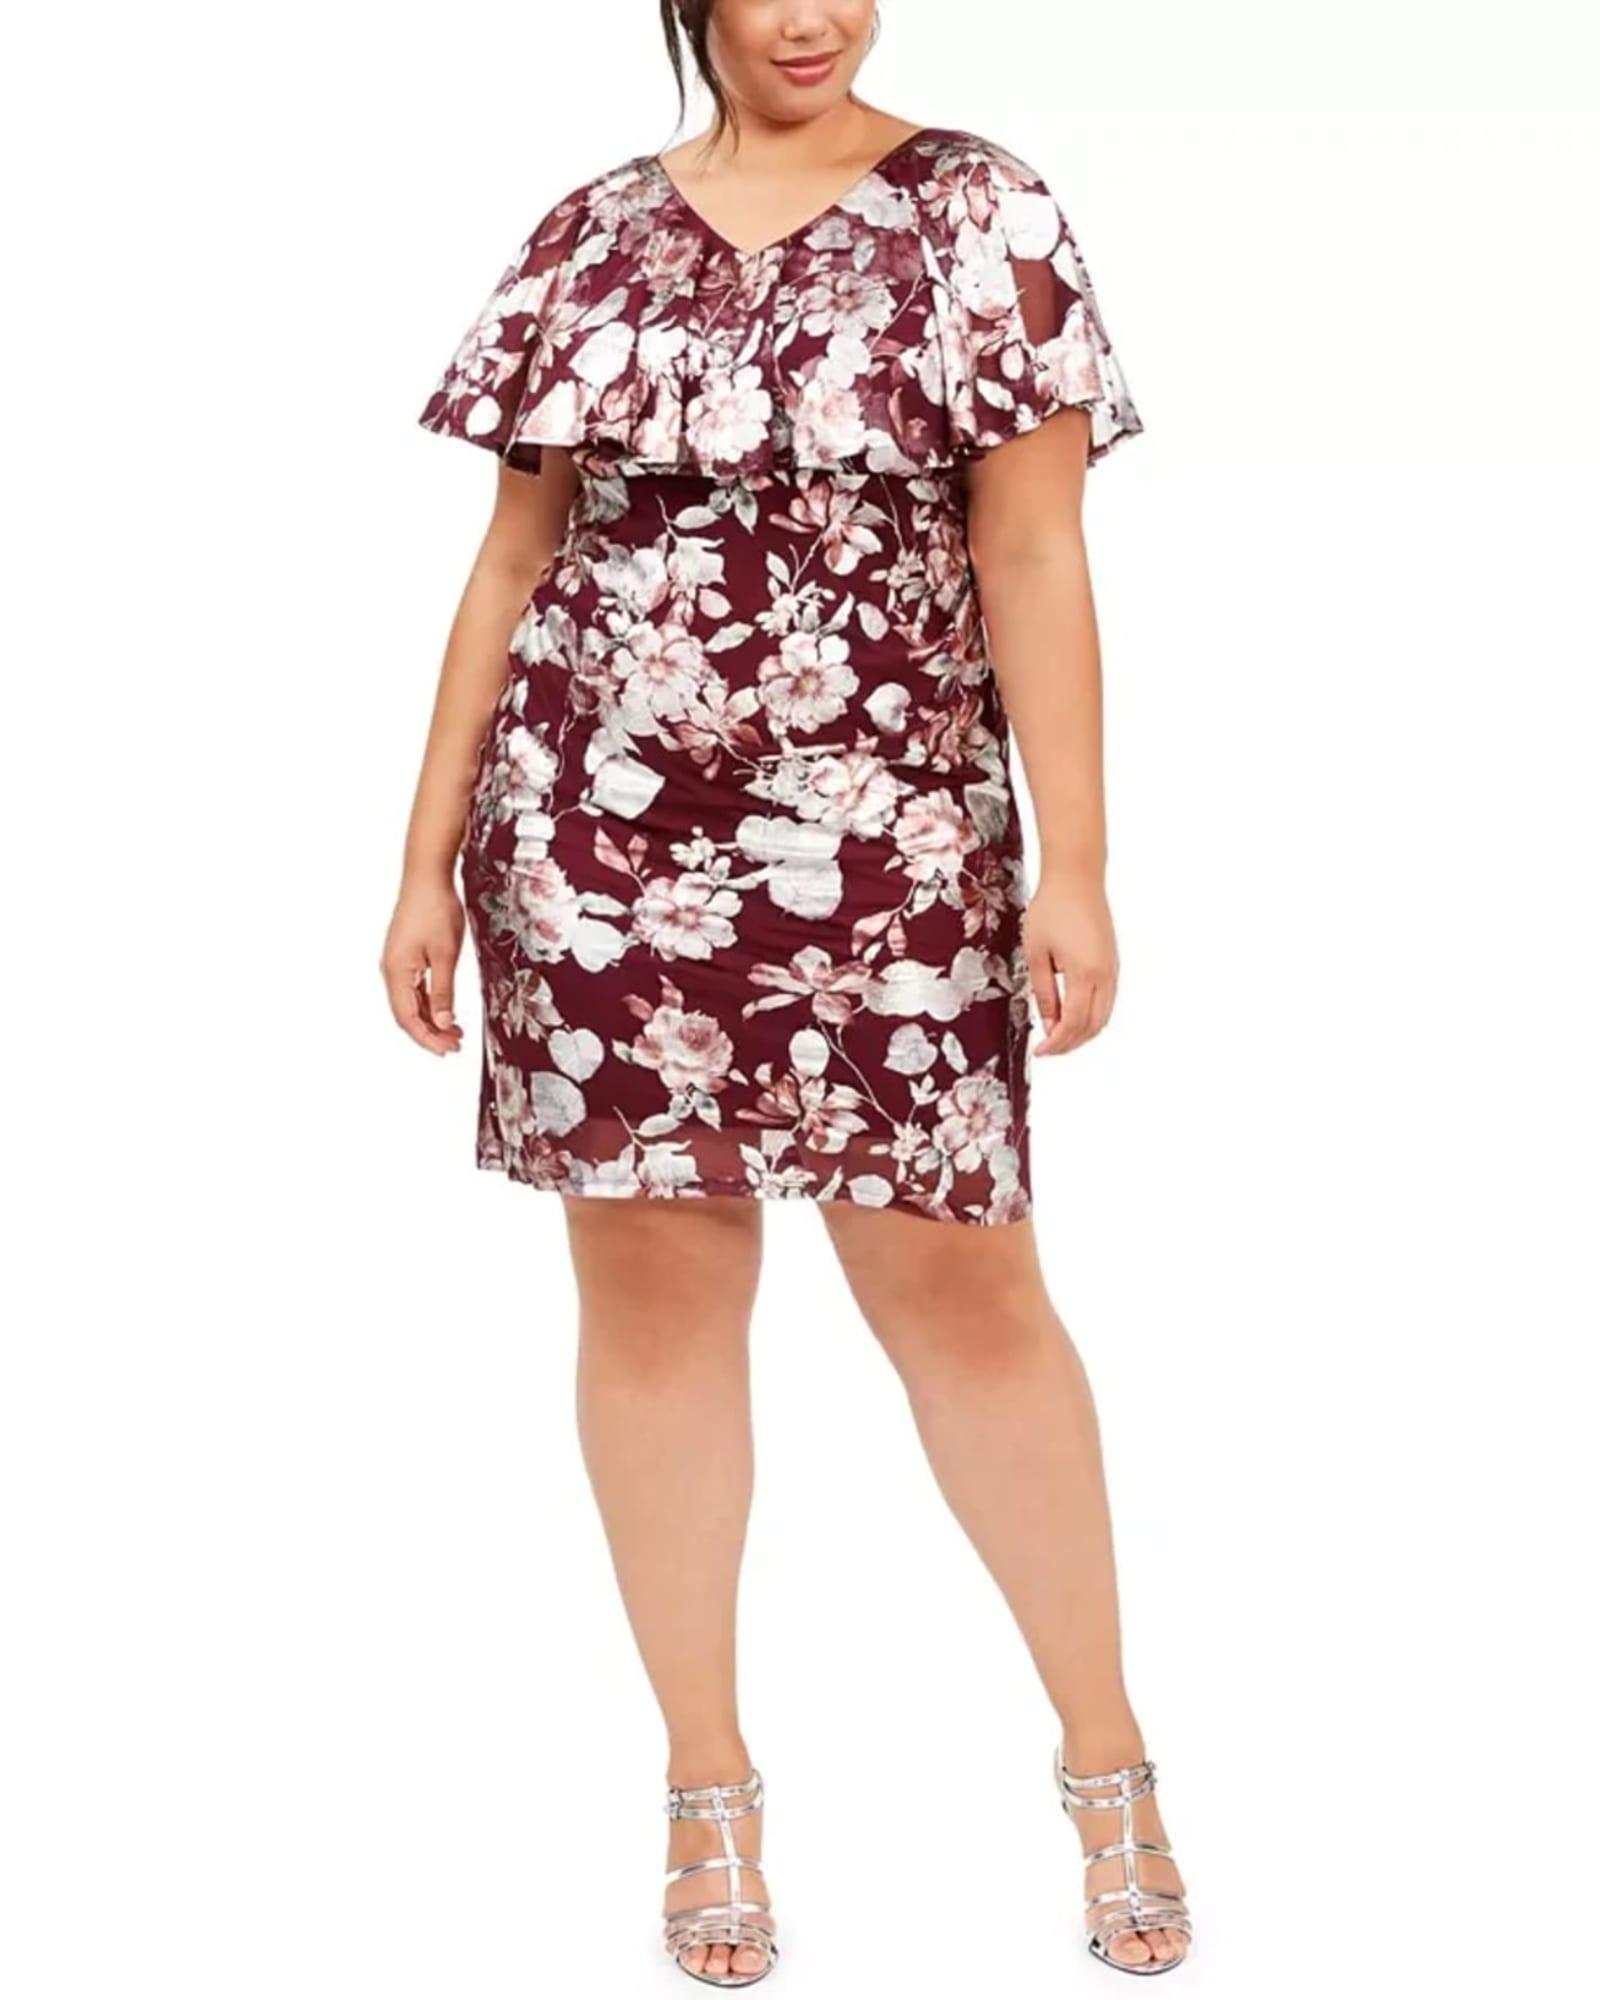 25598303213_9ca4f352c2_k  Plus size outfits, Plus size fashion, Casual plus  size outfits